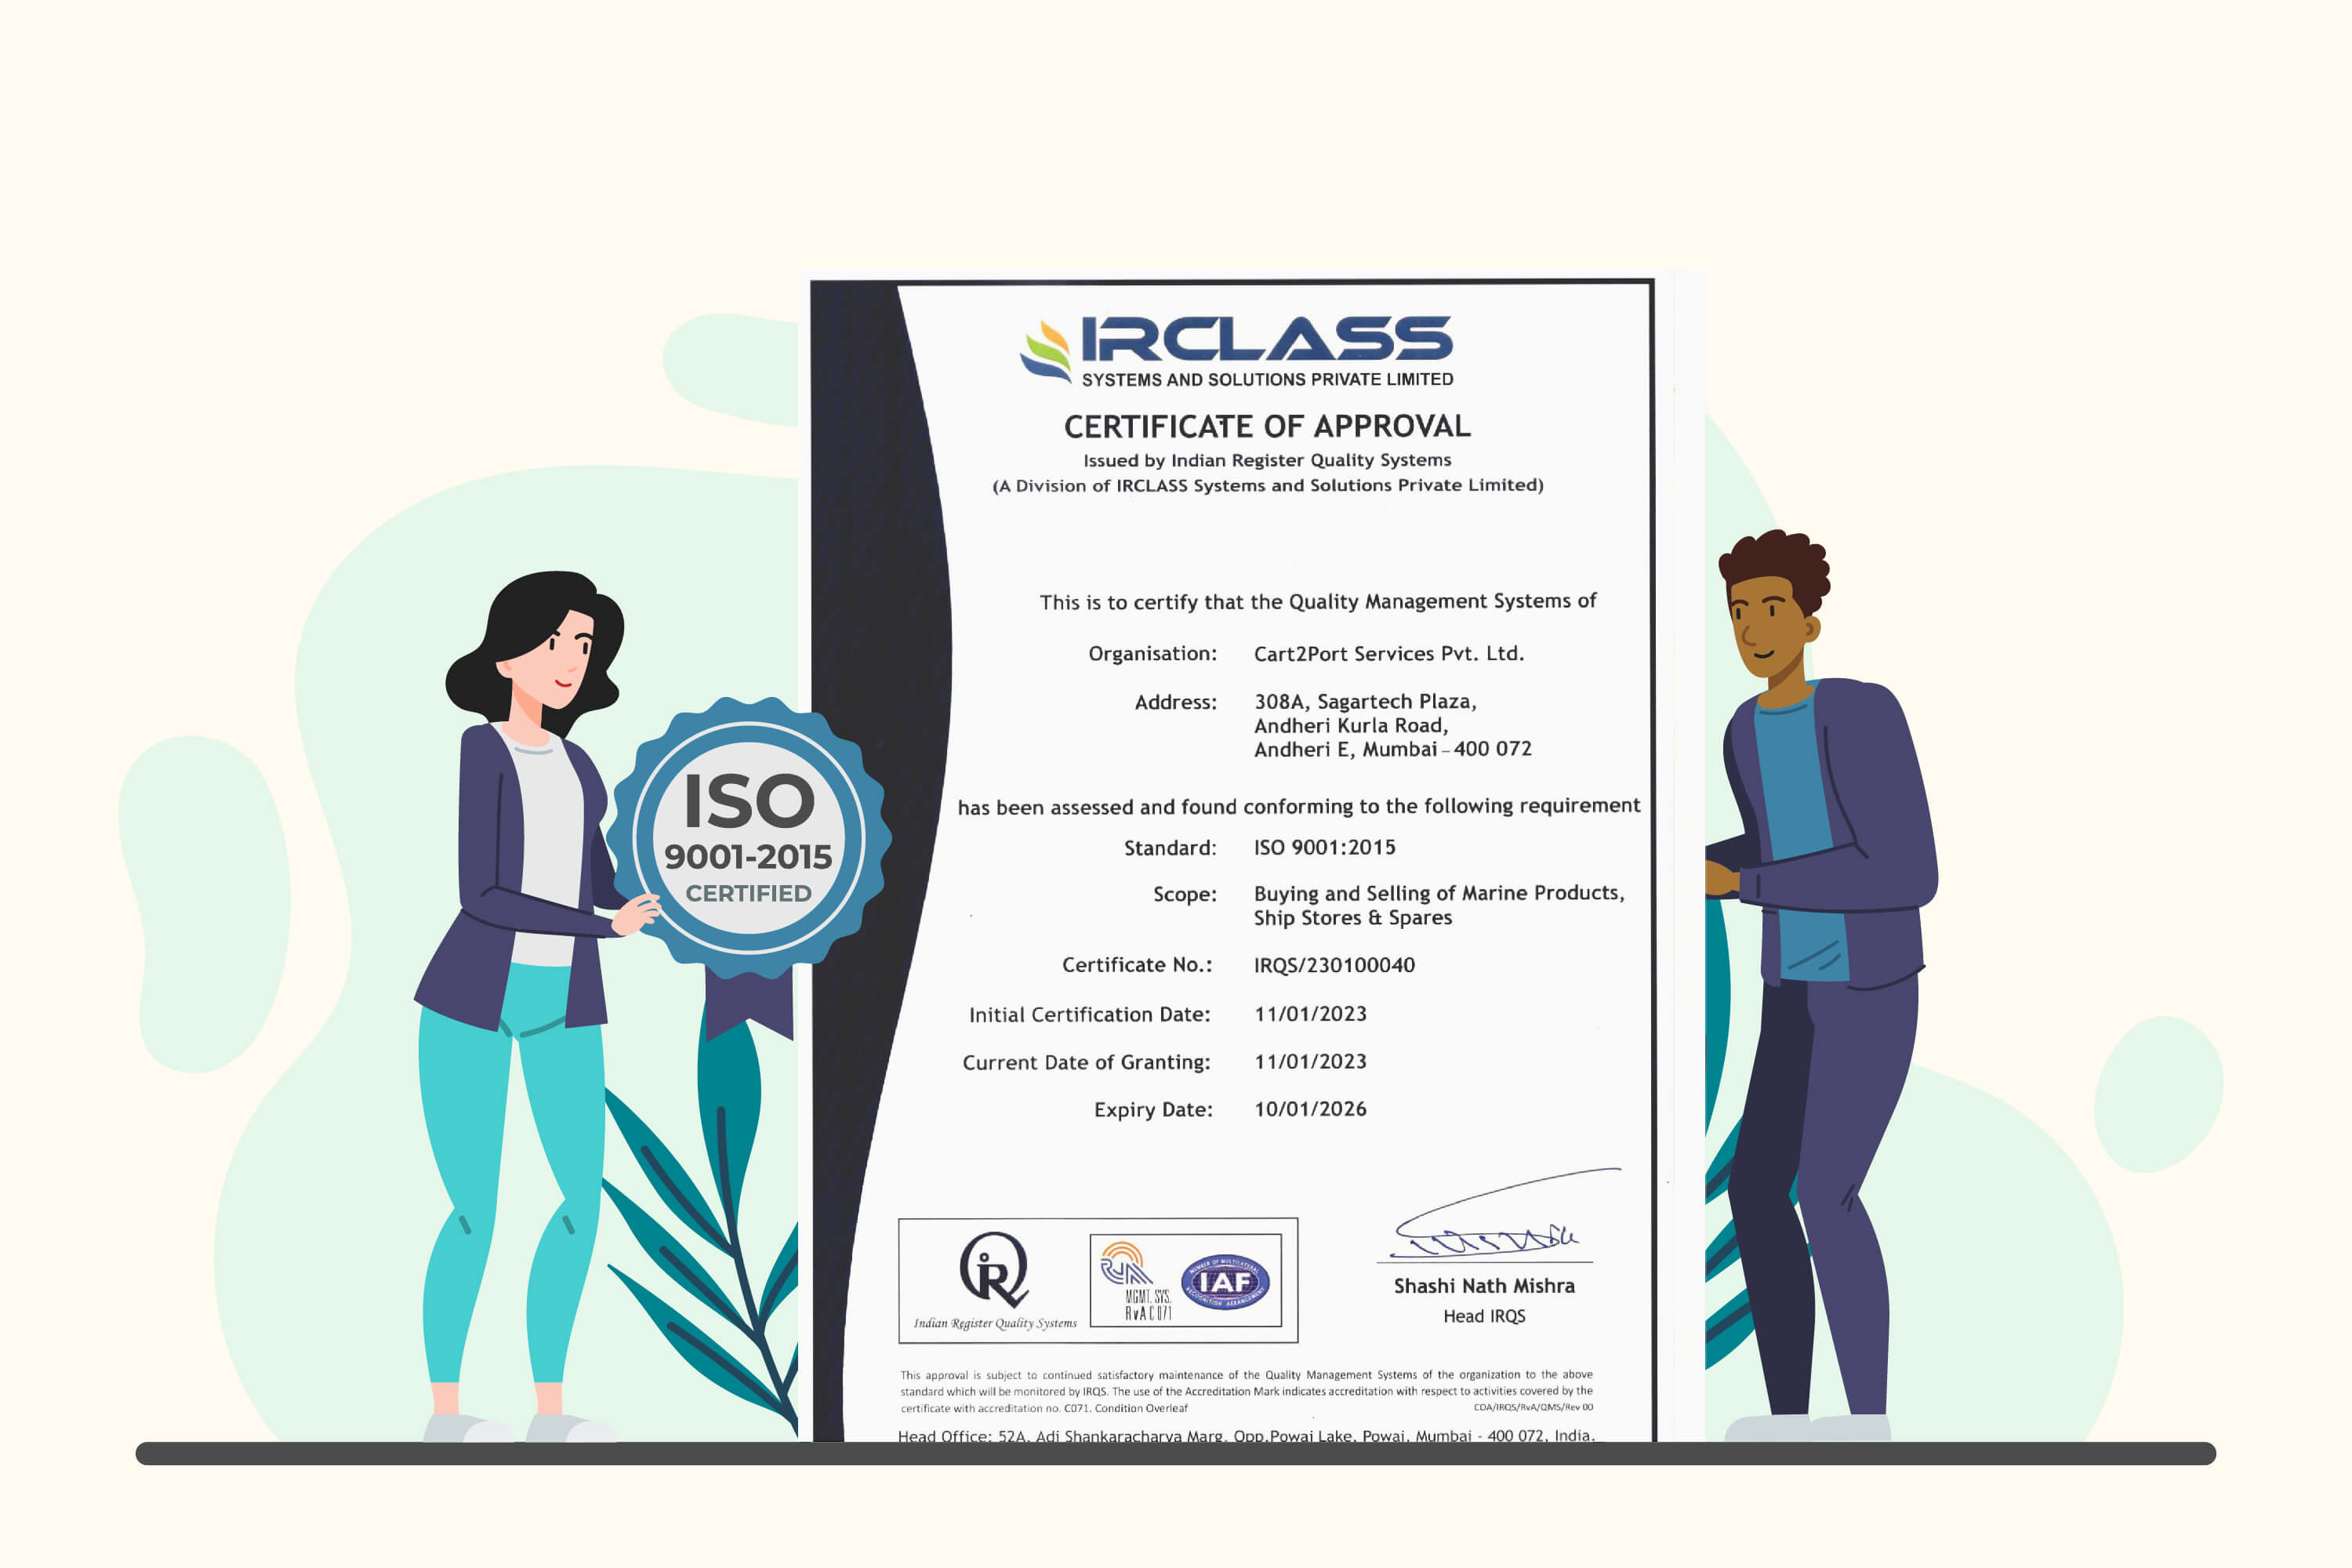 Company Certifications